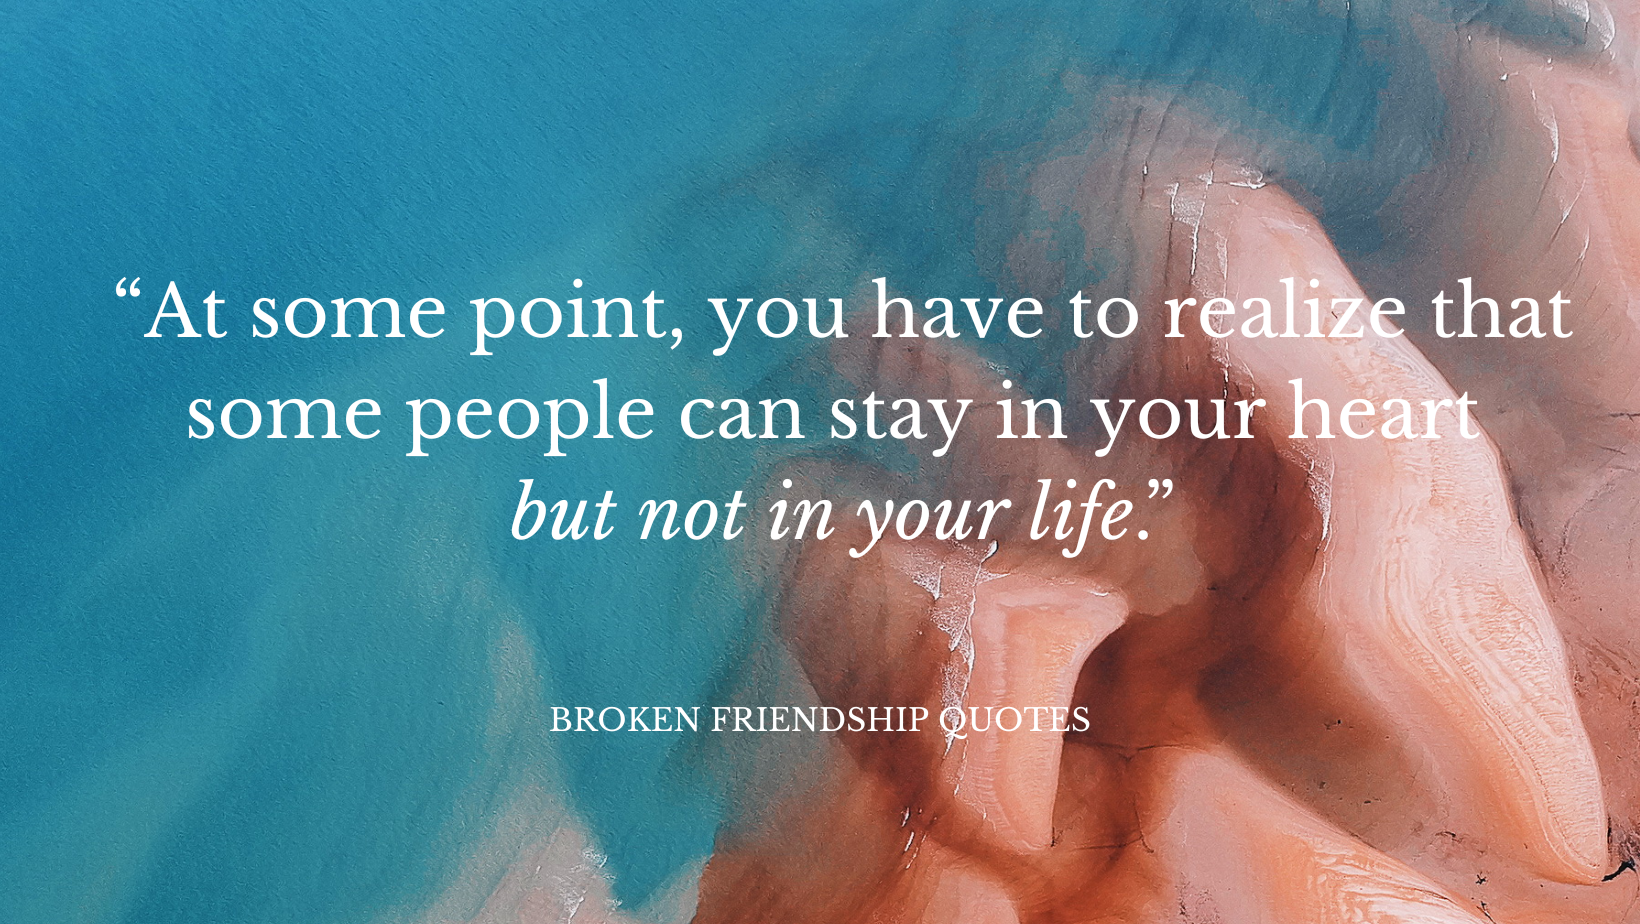 28 Broken Friendship Quotes That Will Hit You Right In The Heart ...